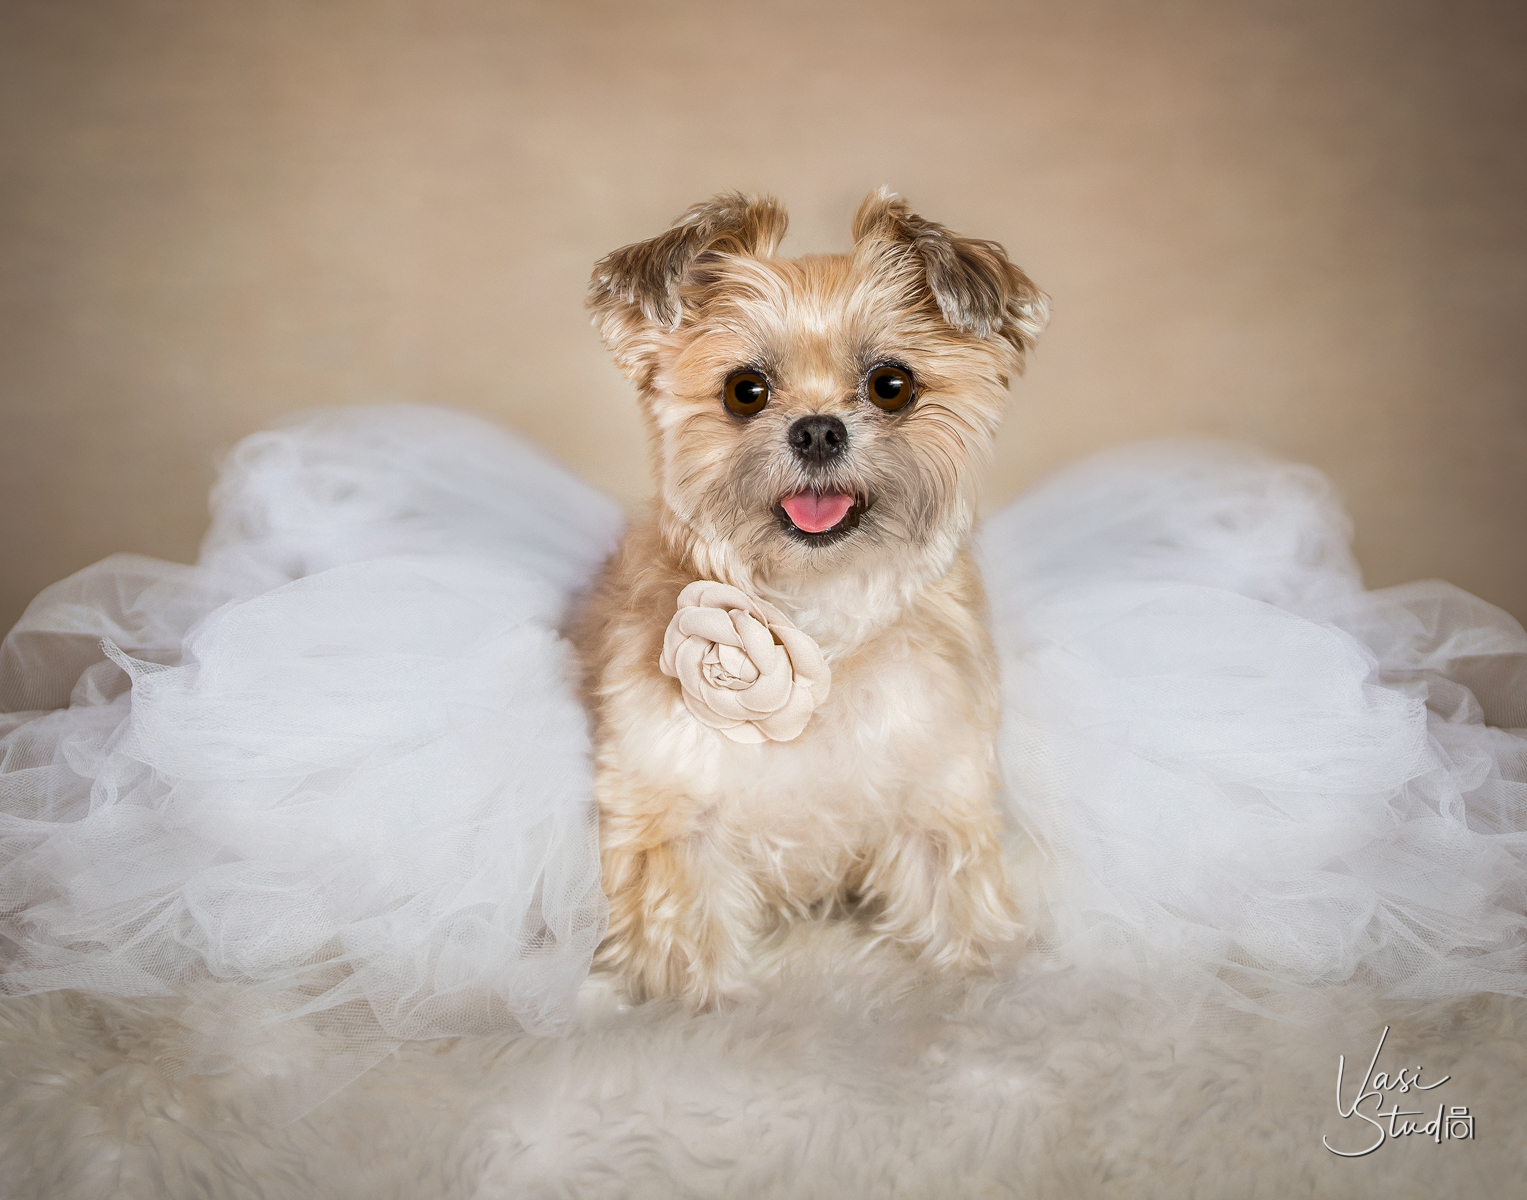 To schedule a pet photography session in Palm Beach Gardens, call 561-307-9875